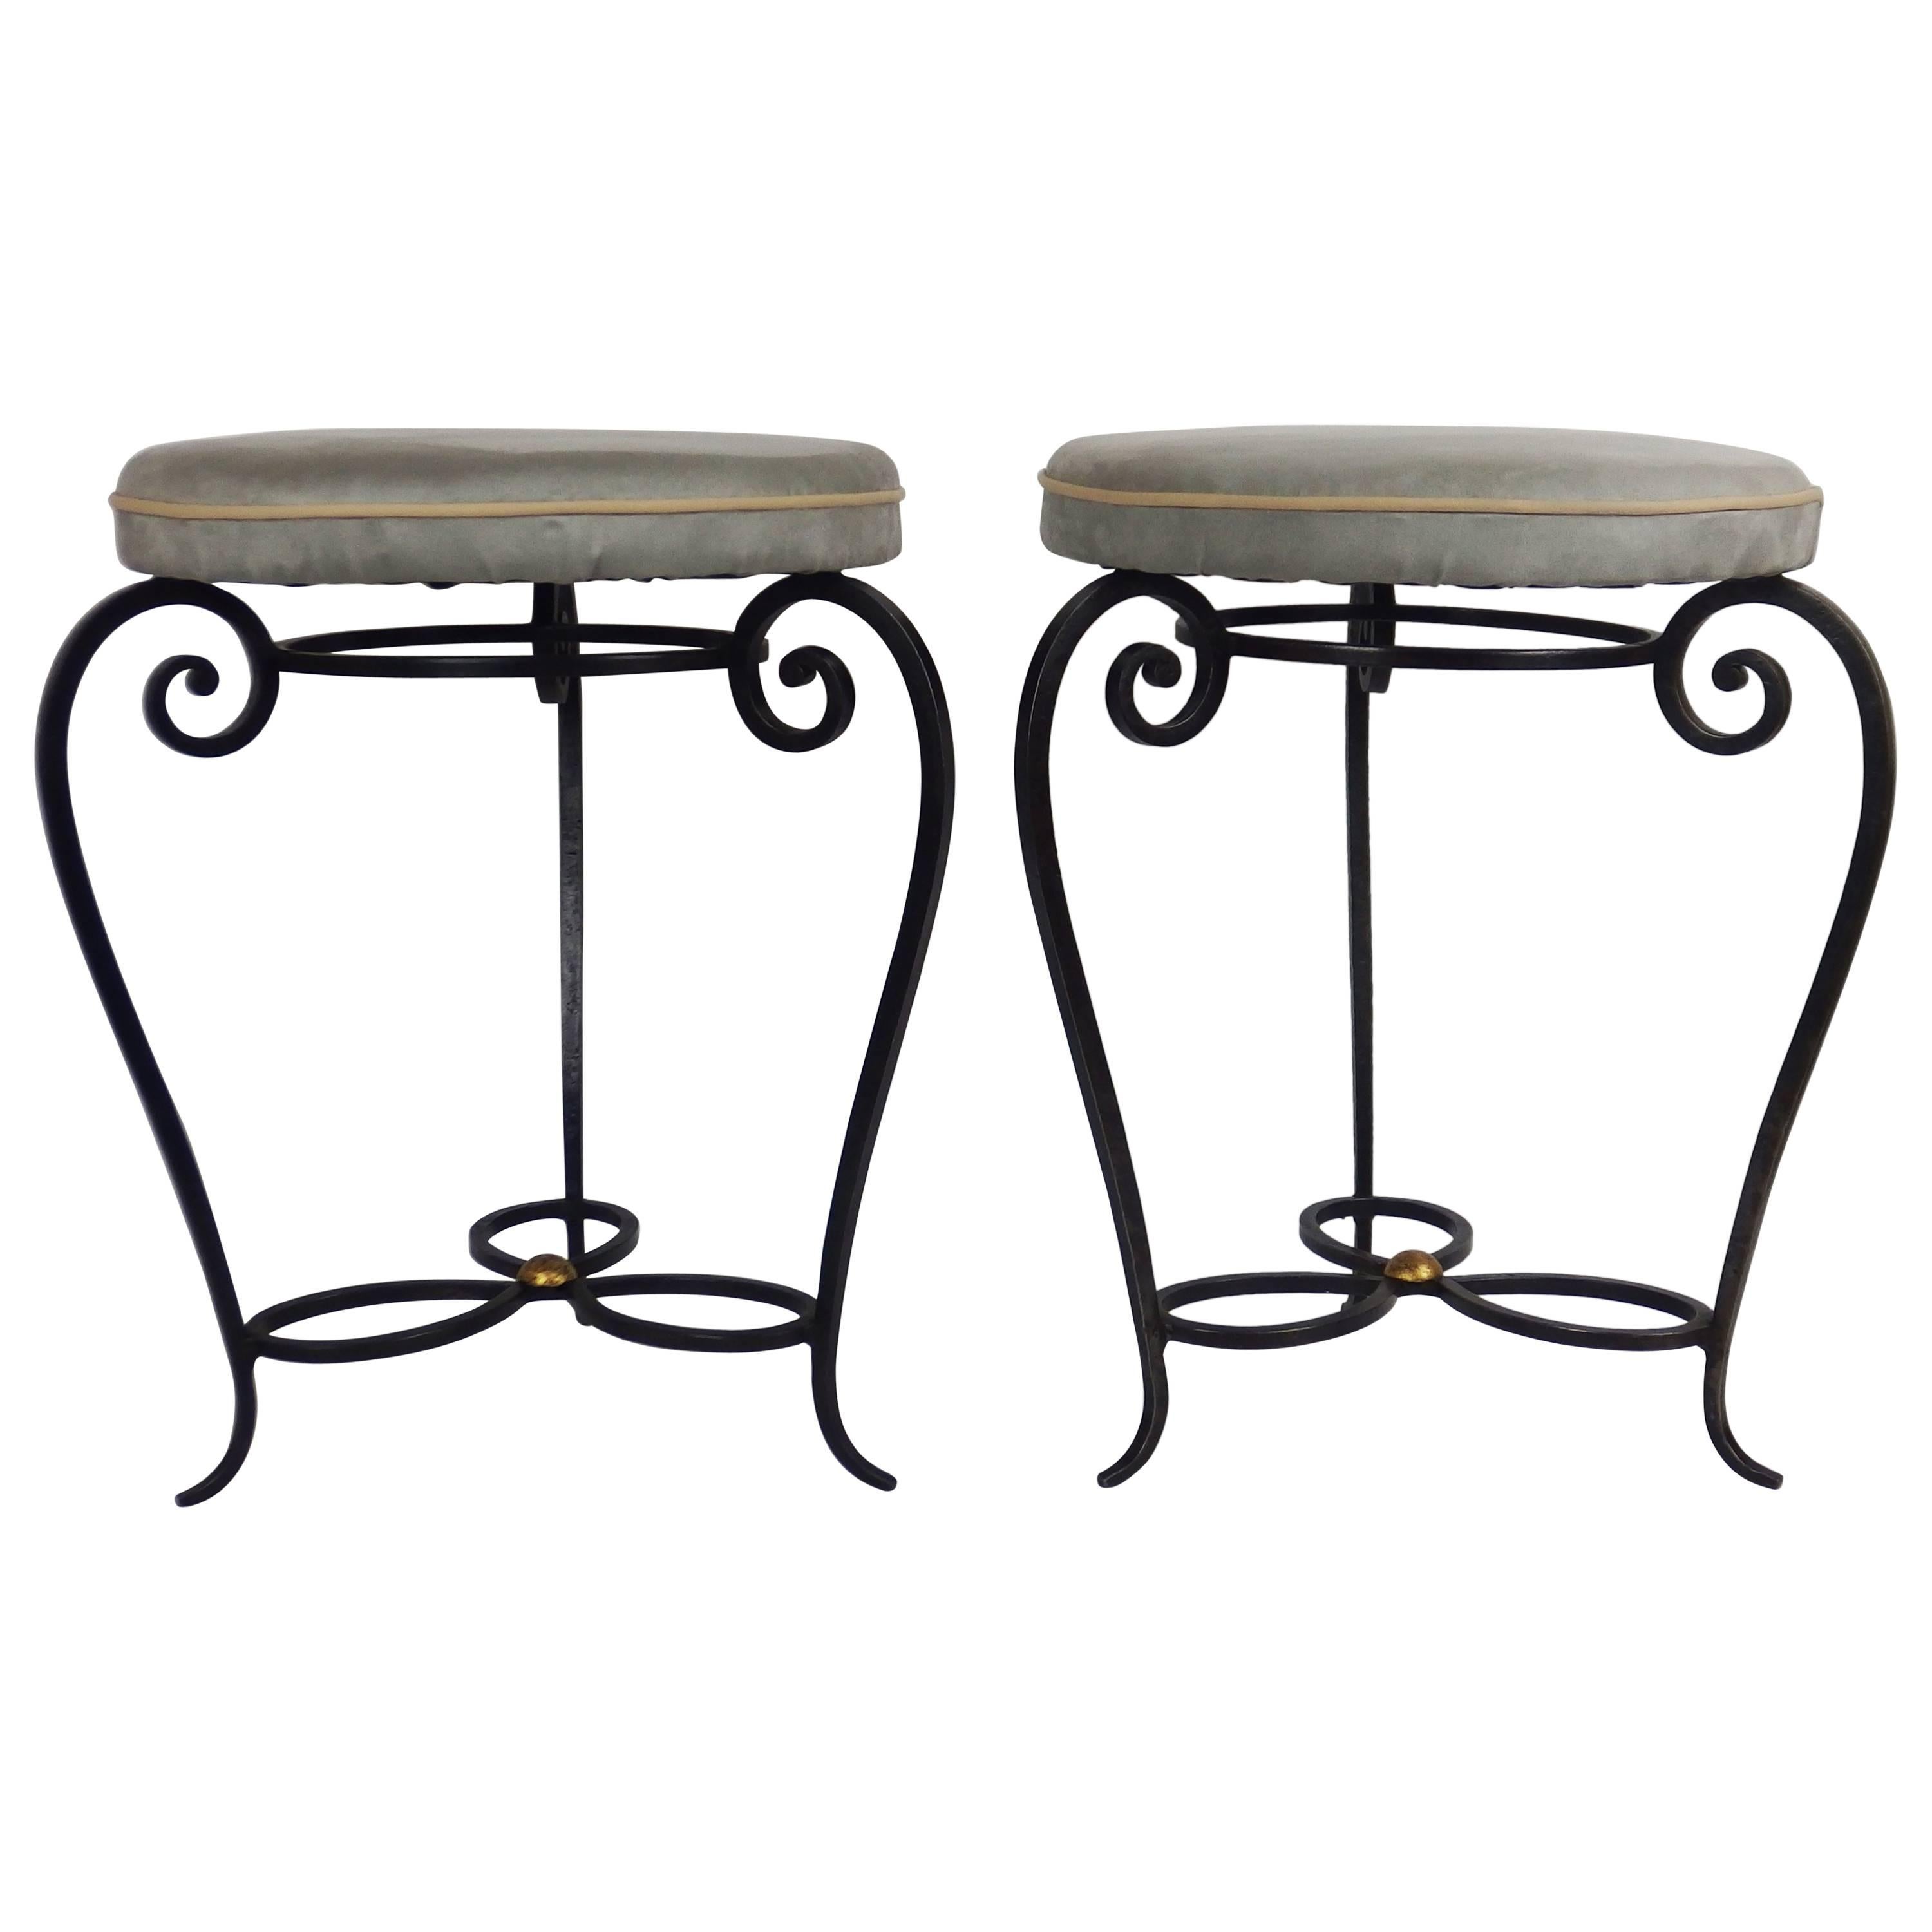 1940s Wrought Iron Pair of Stools For Sale